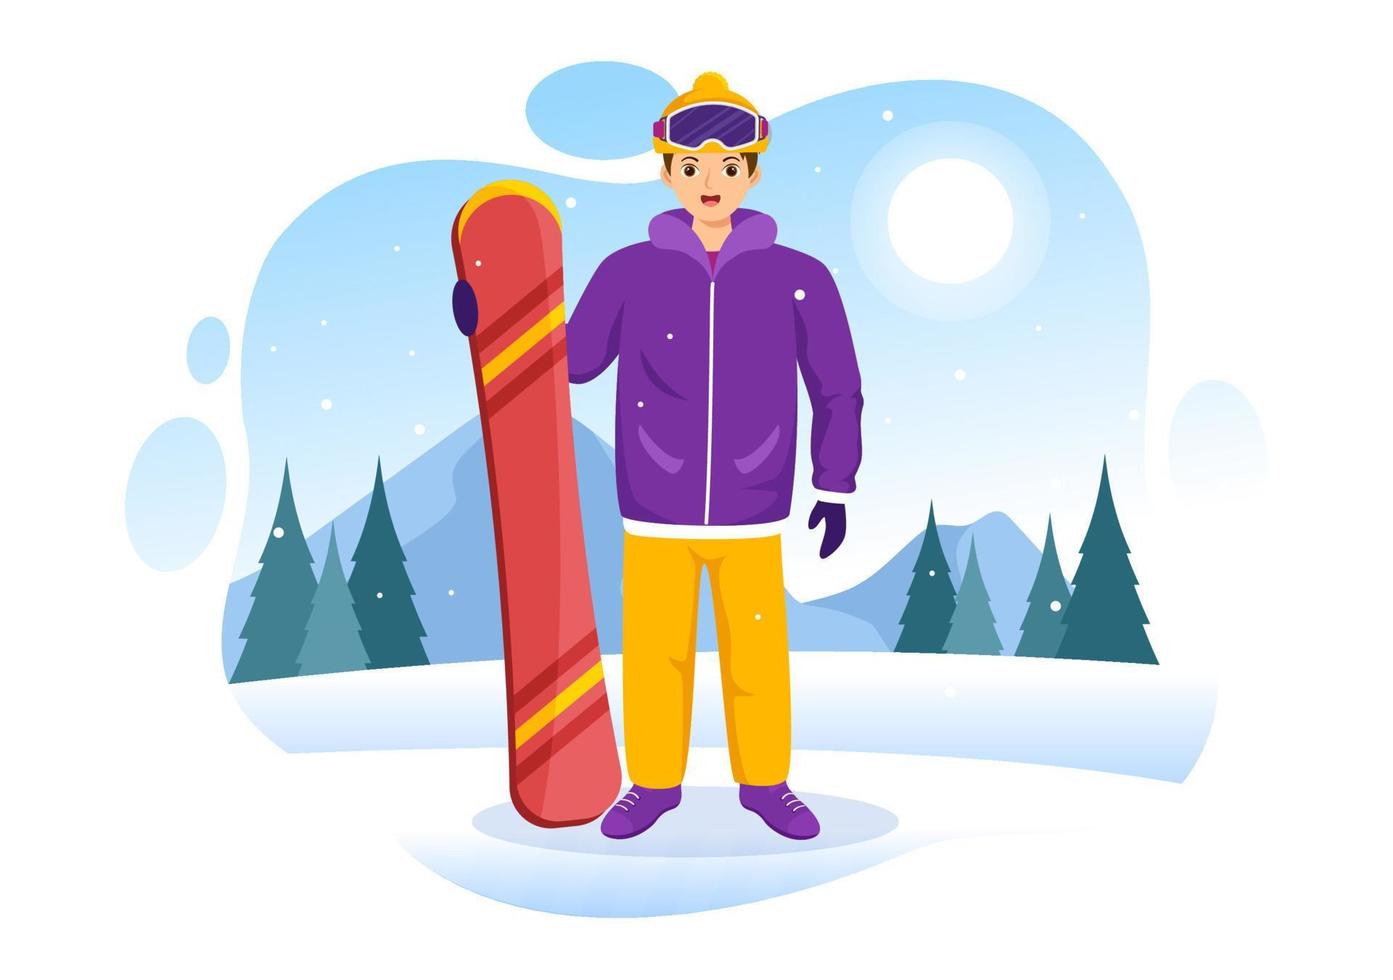 Snowboarding with People Sliding and Jumping on Snowy Mountain Side or Slope Inside Flat Cartoon Hand Drawn Templates Illustration vector